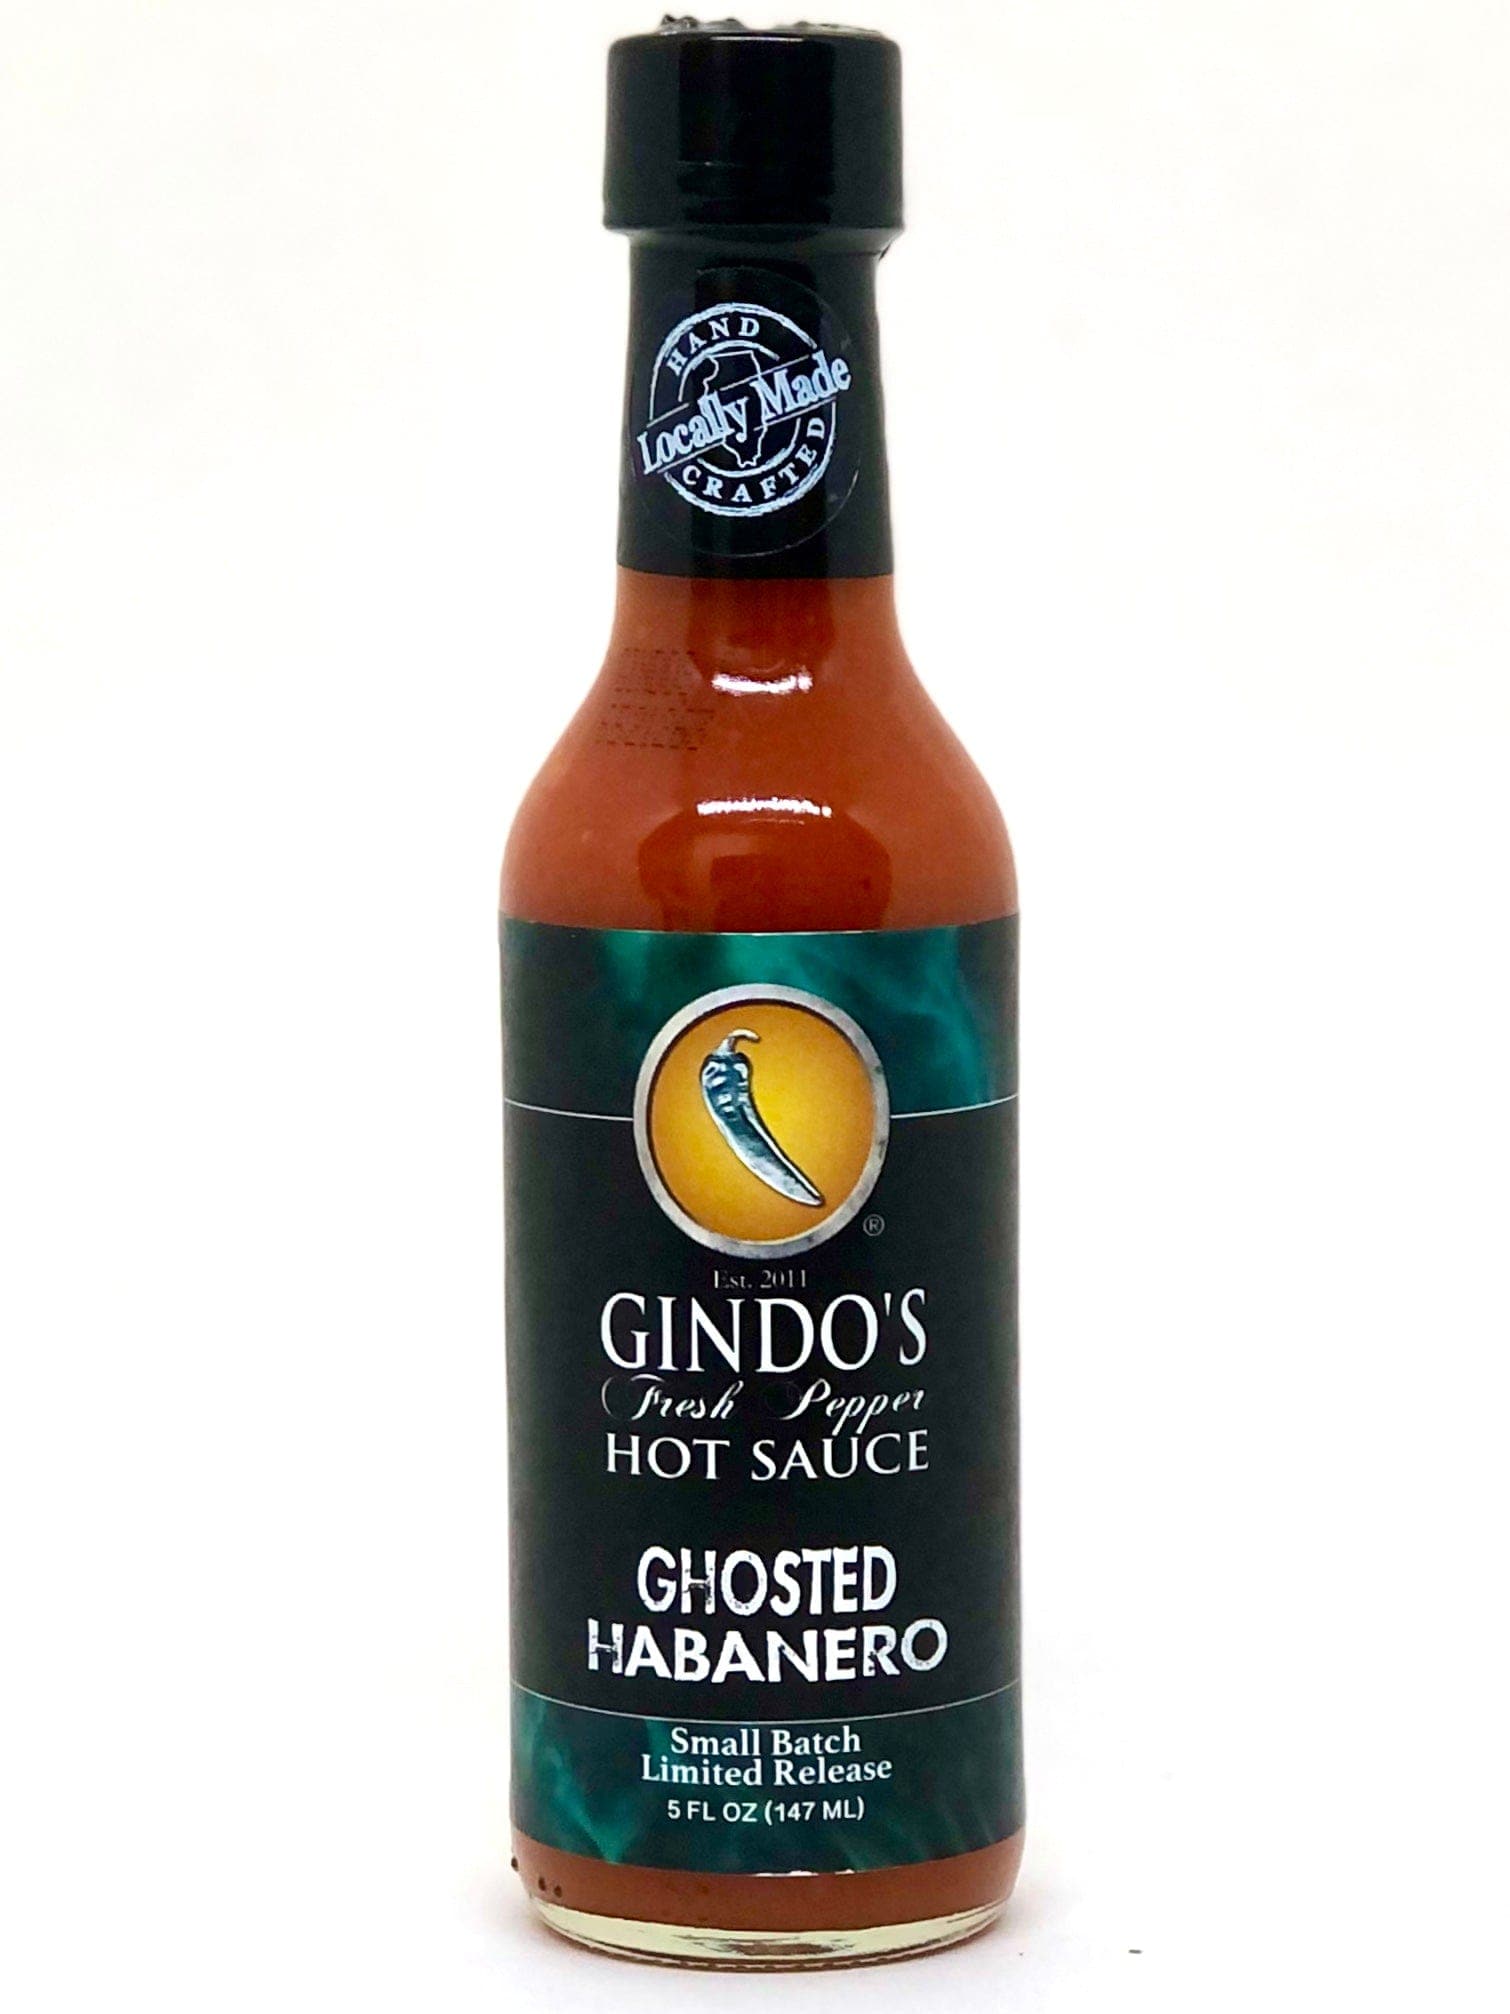 Ghosted Habanero Hot Sauce